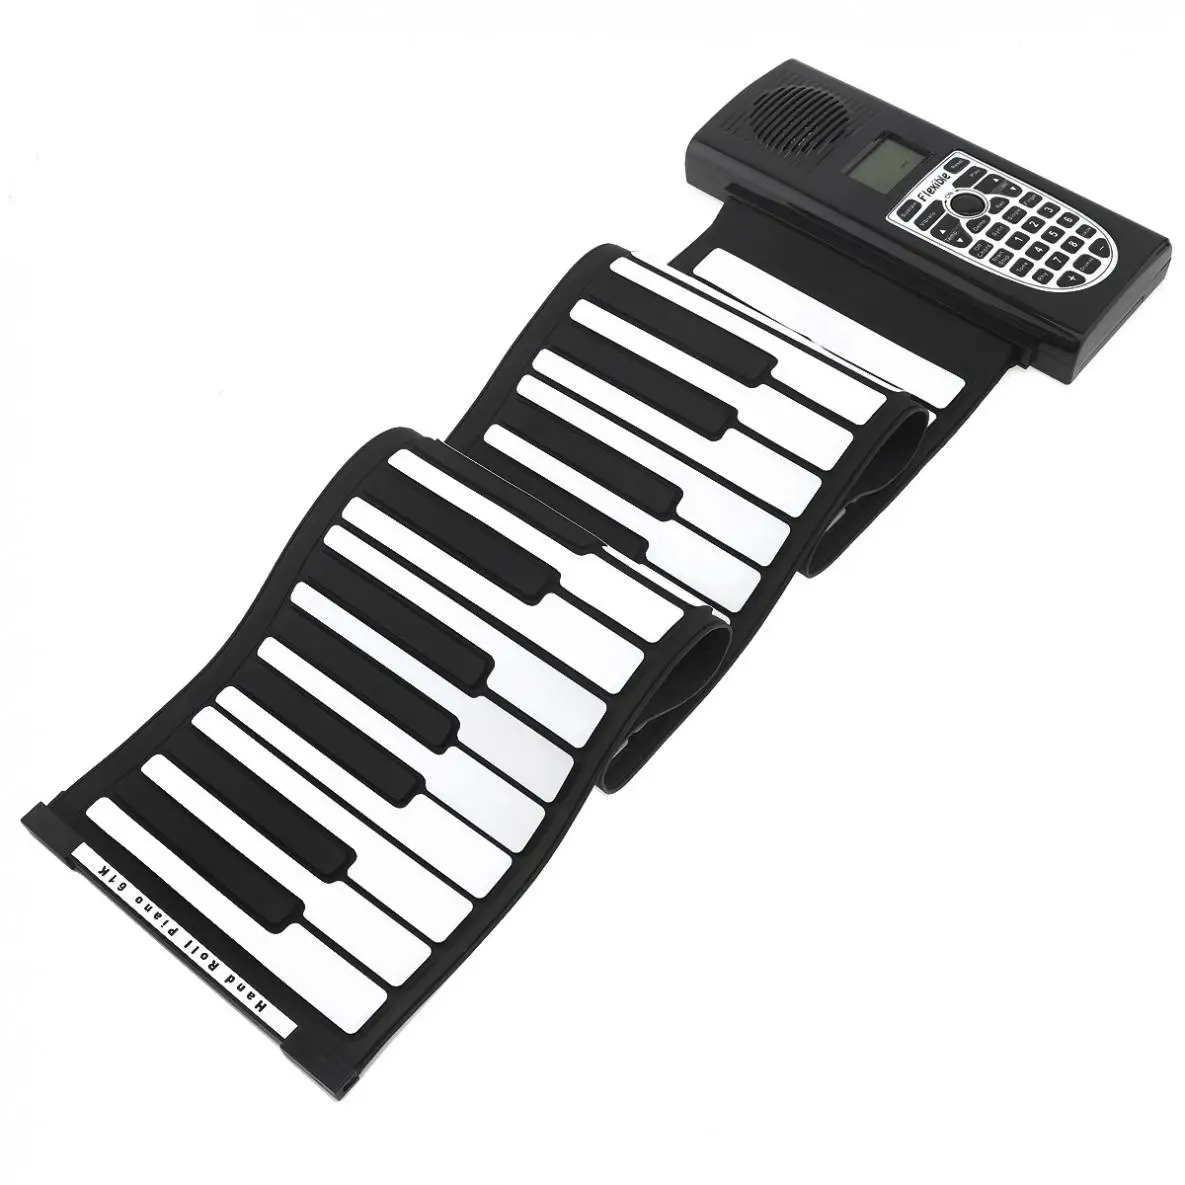 

61 Keys USB MIDI Output Roll Up Piano Electronic Portable High Quality Silicone Flexible Keyboard Organ Built-in Speakers